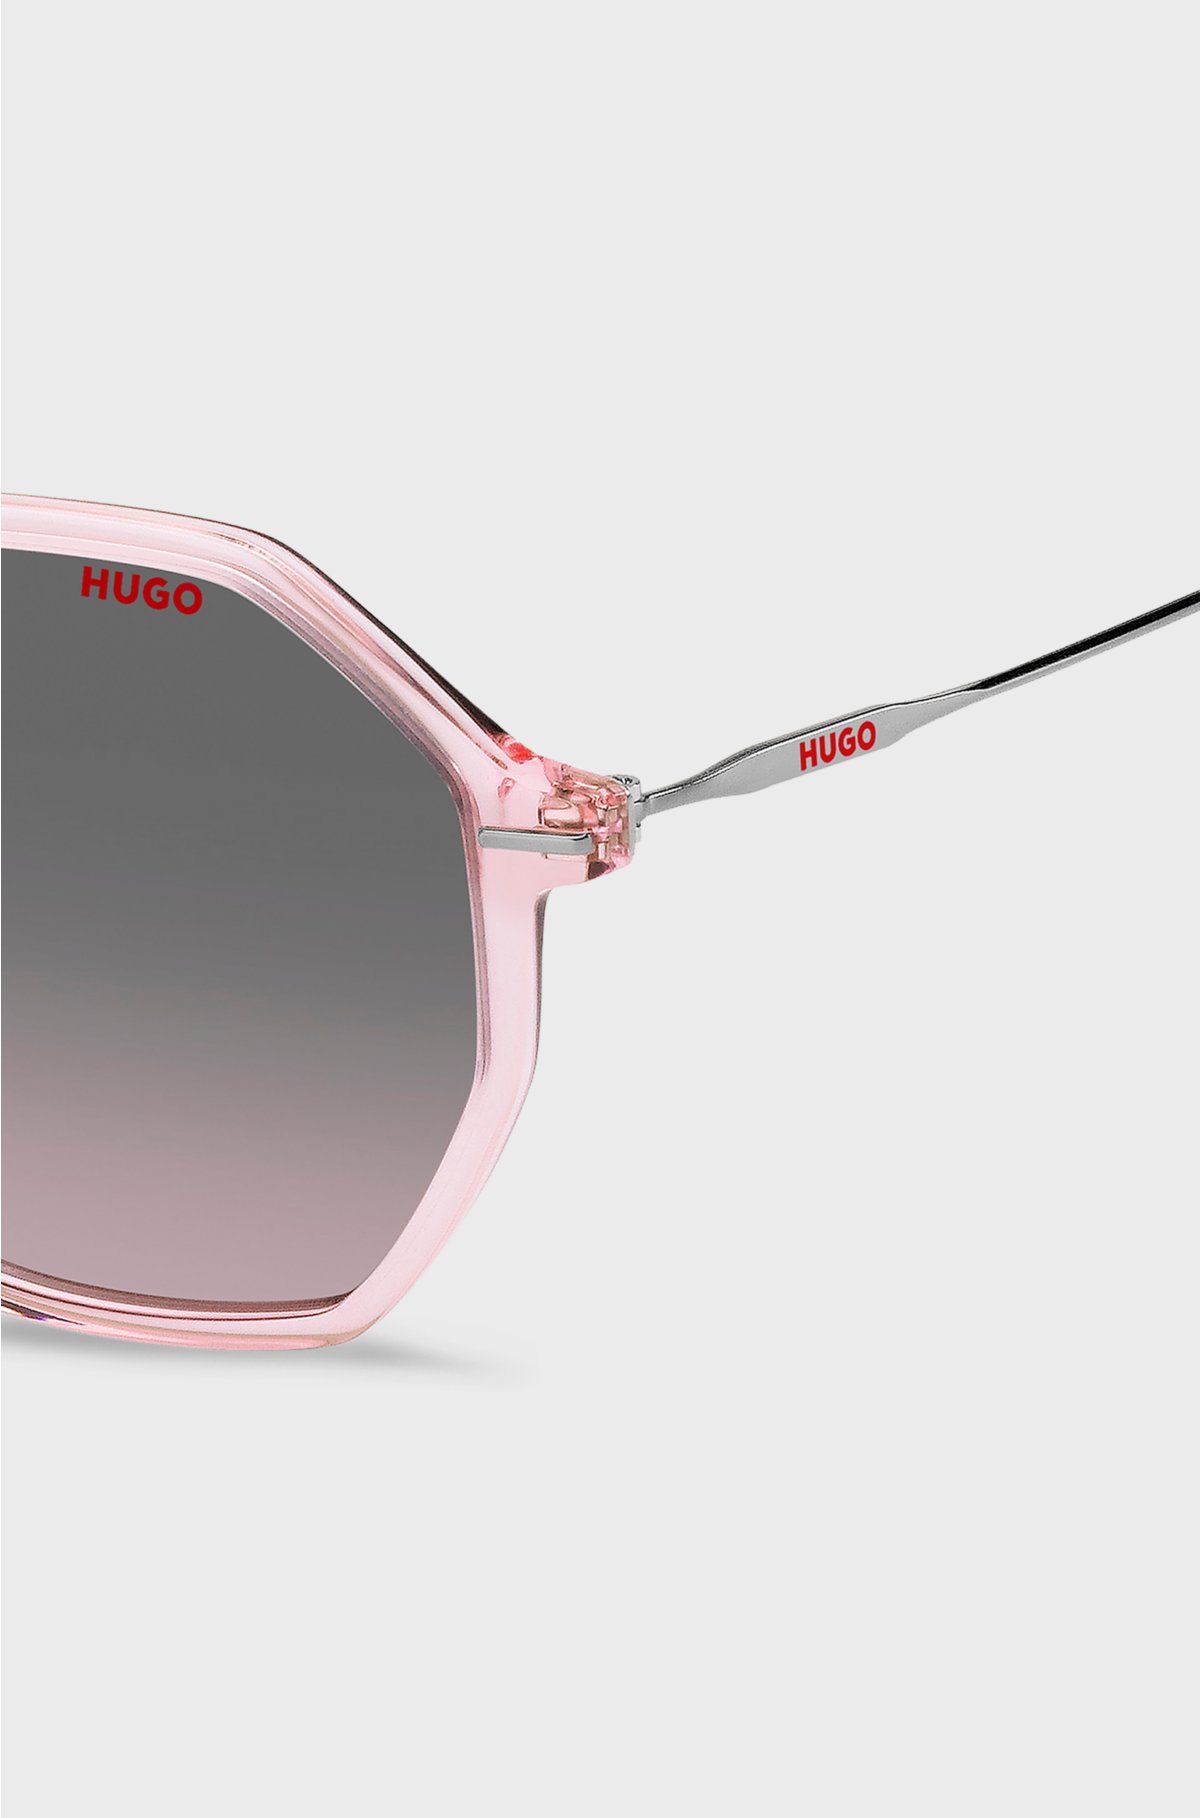 Pink-acetate sunglasses with branded metal temples, light pink